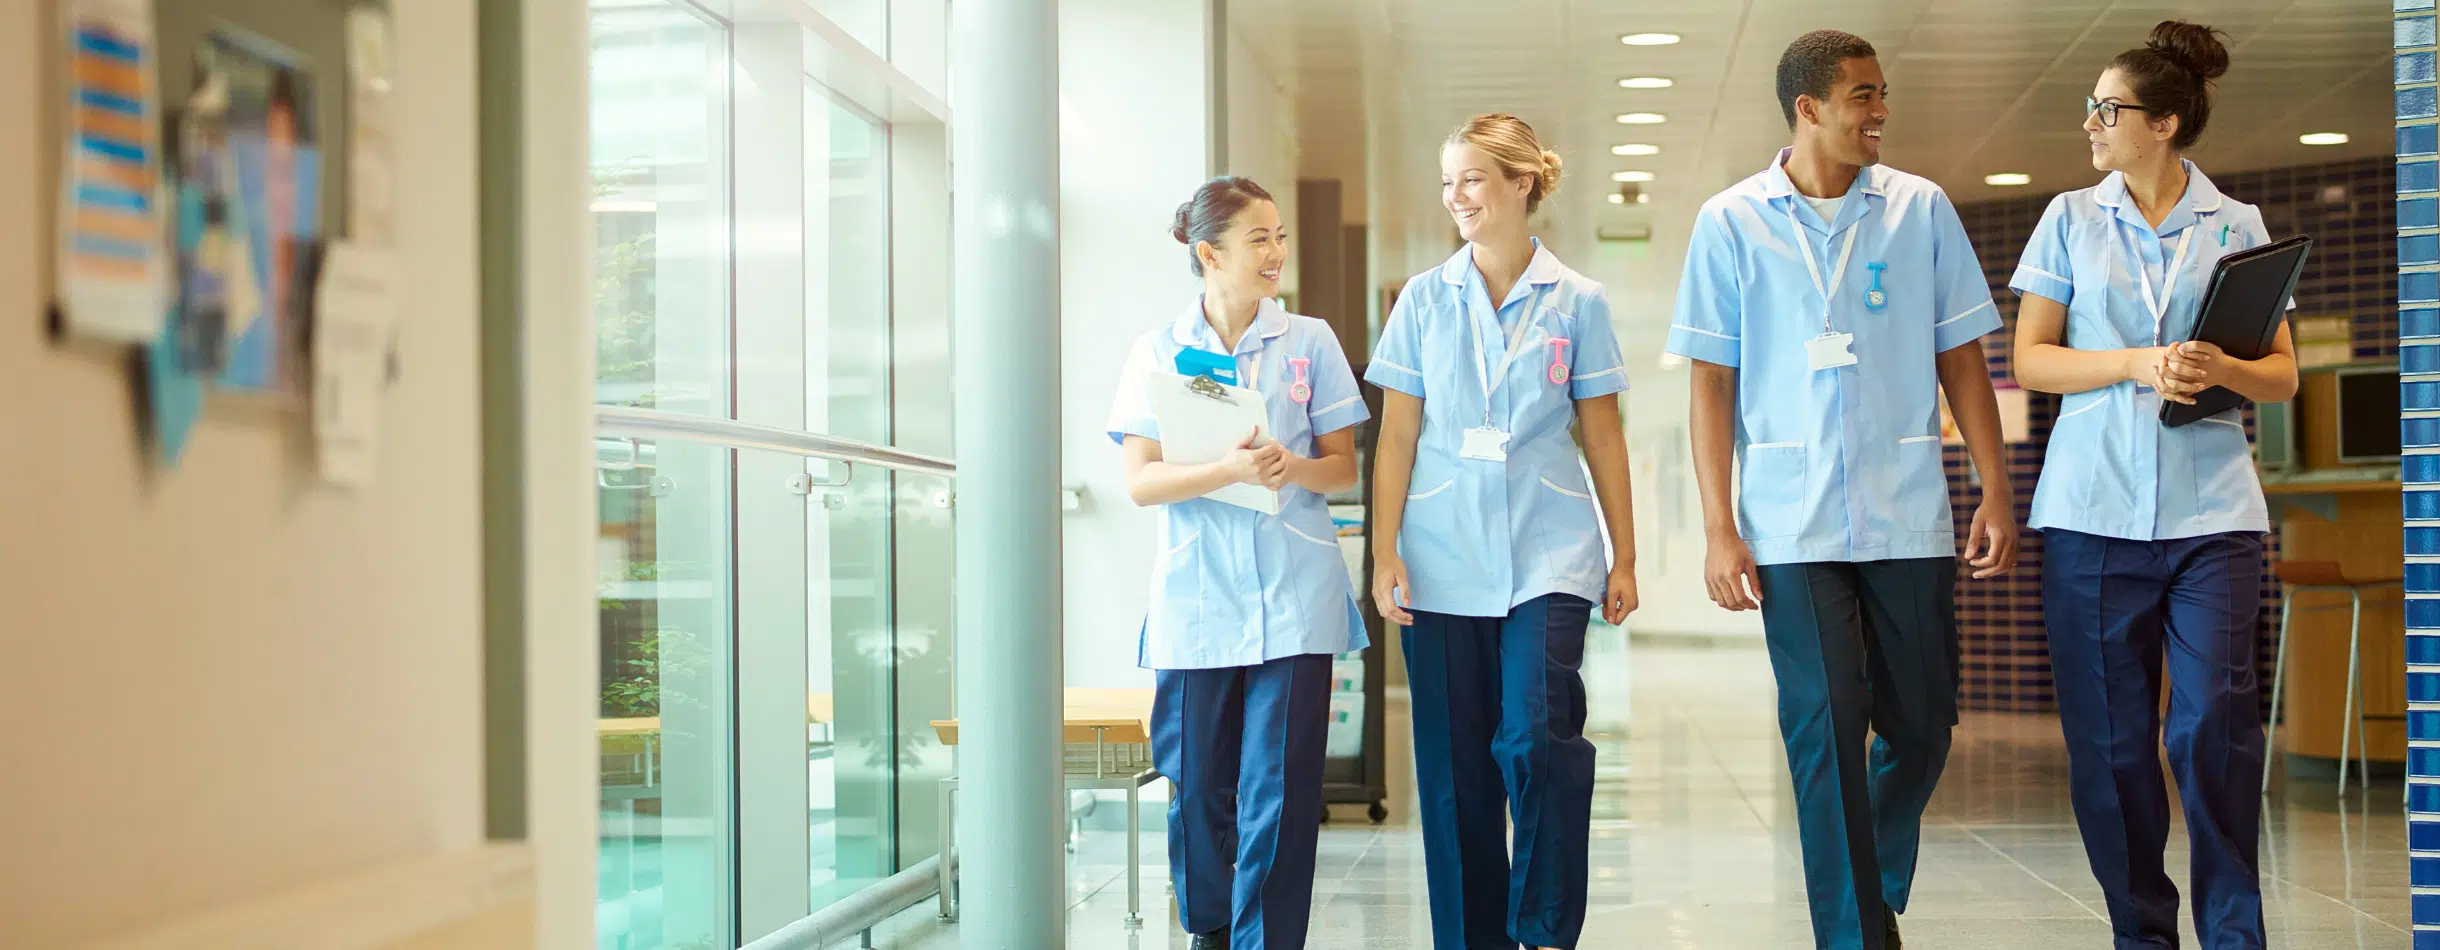 A group of healthcare professionals walk through a hallway, making small talk with one another.